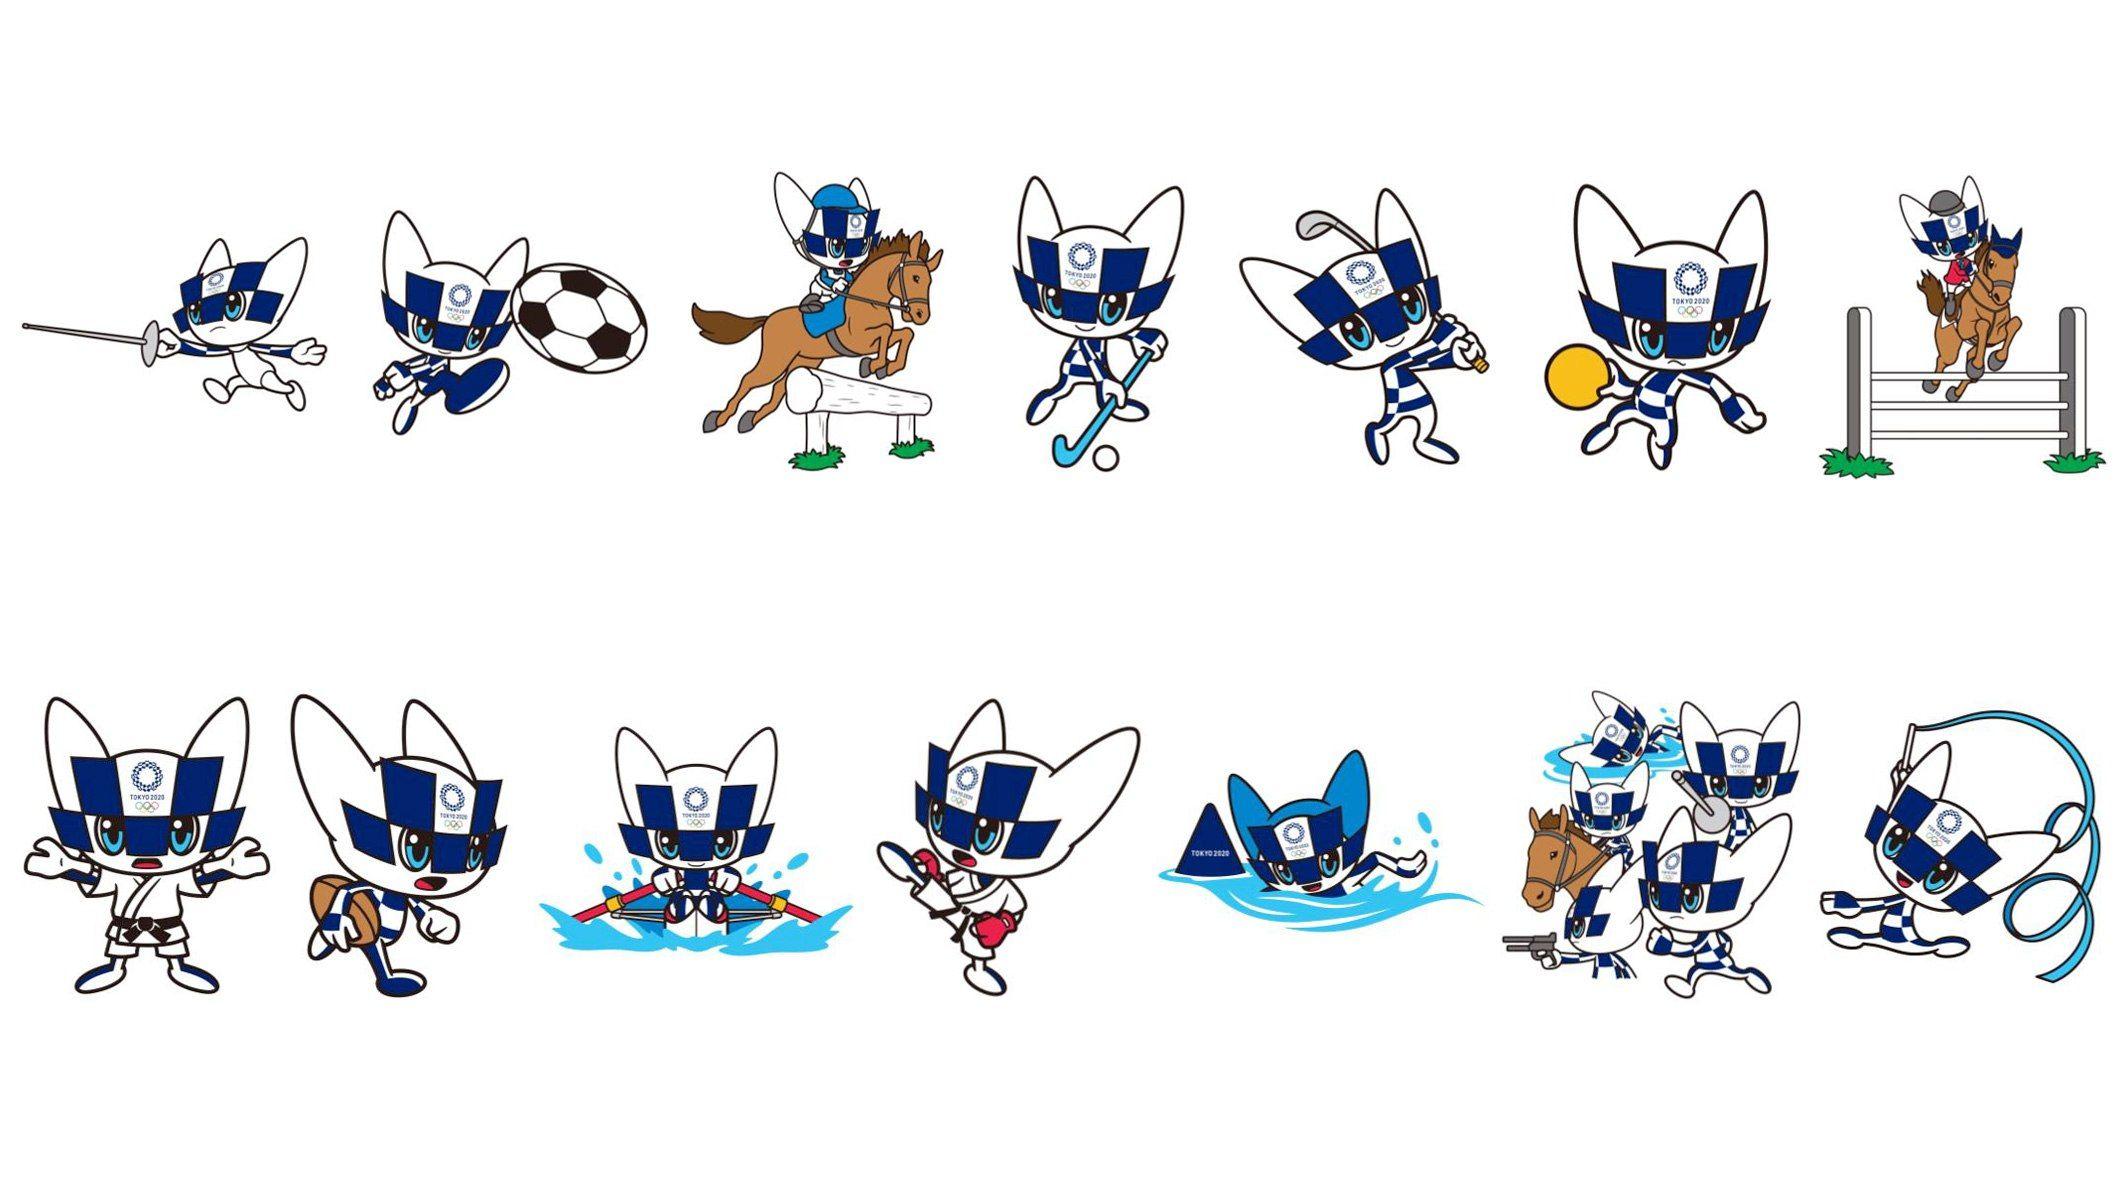 Tokyo 2020 unveils mascot image representing Olympic sports